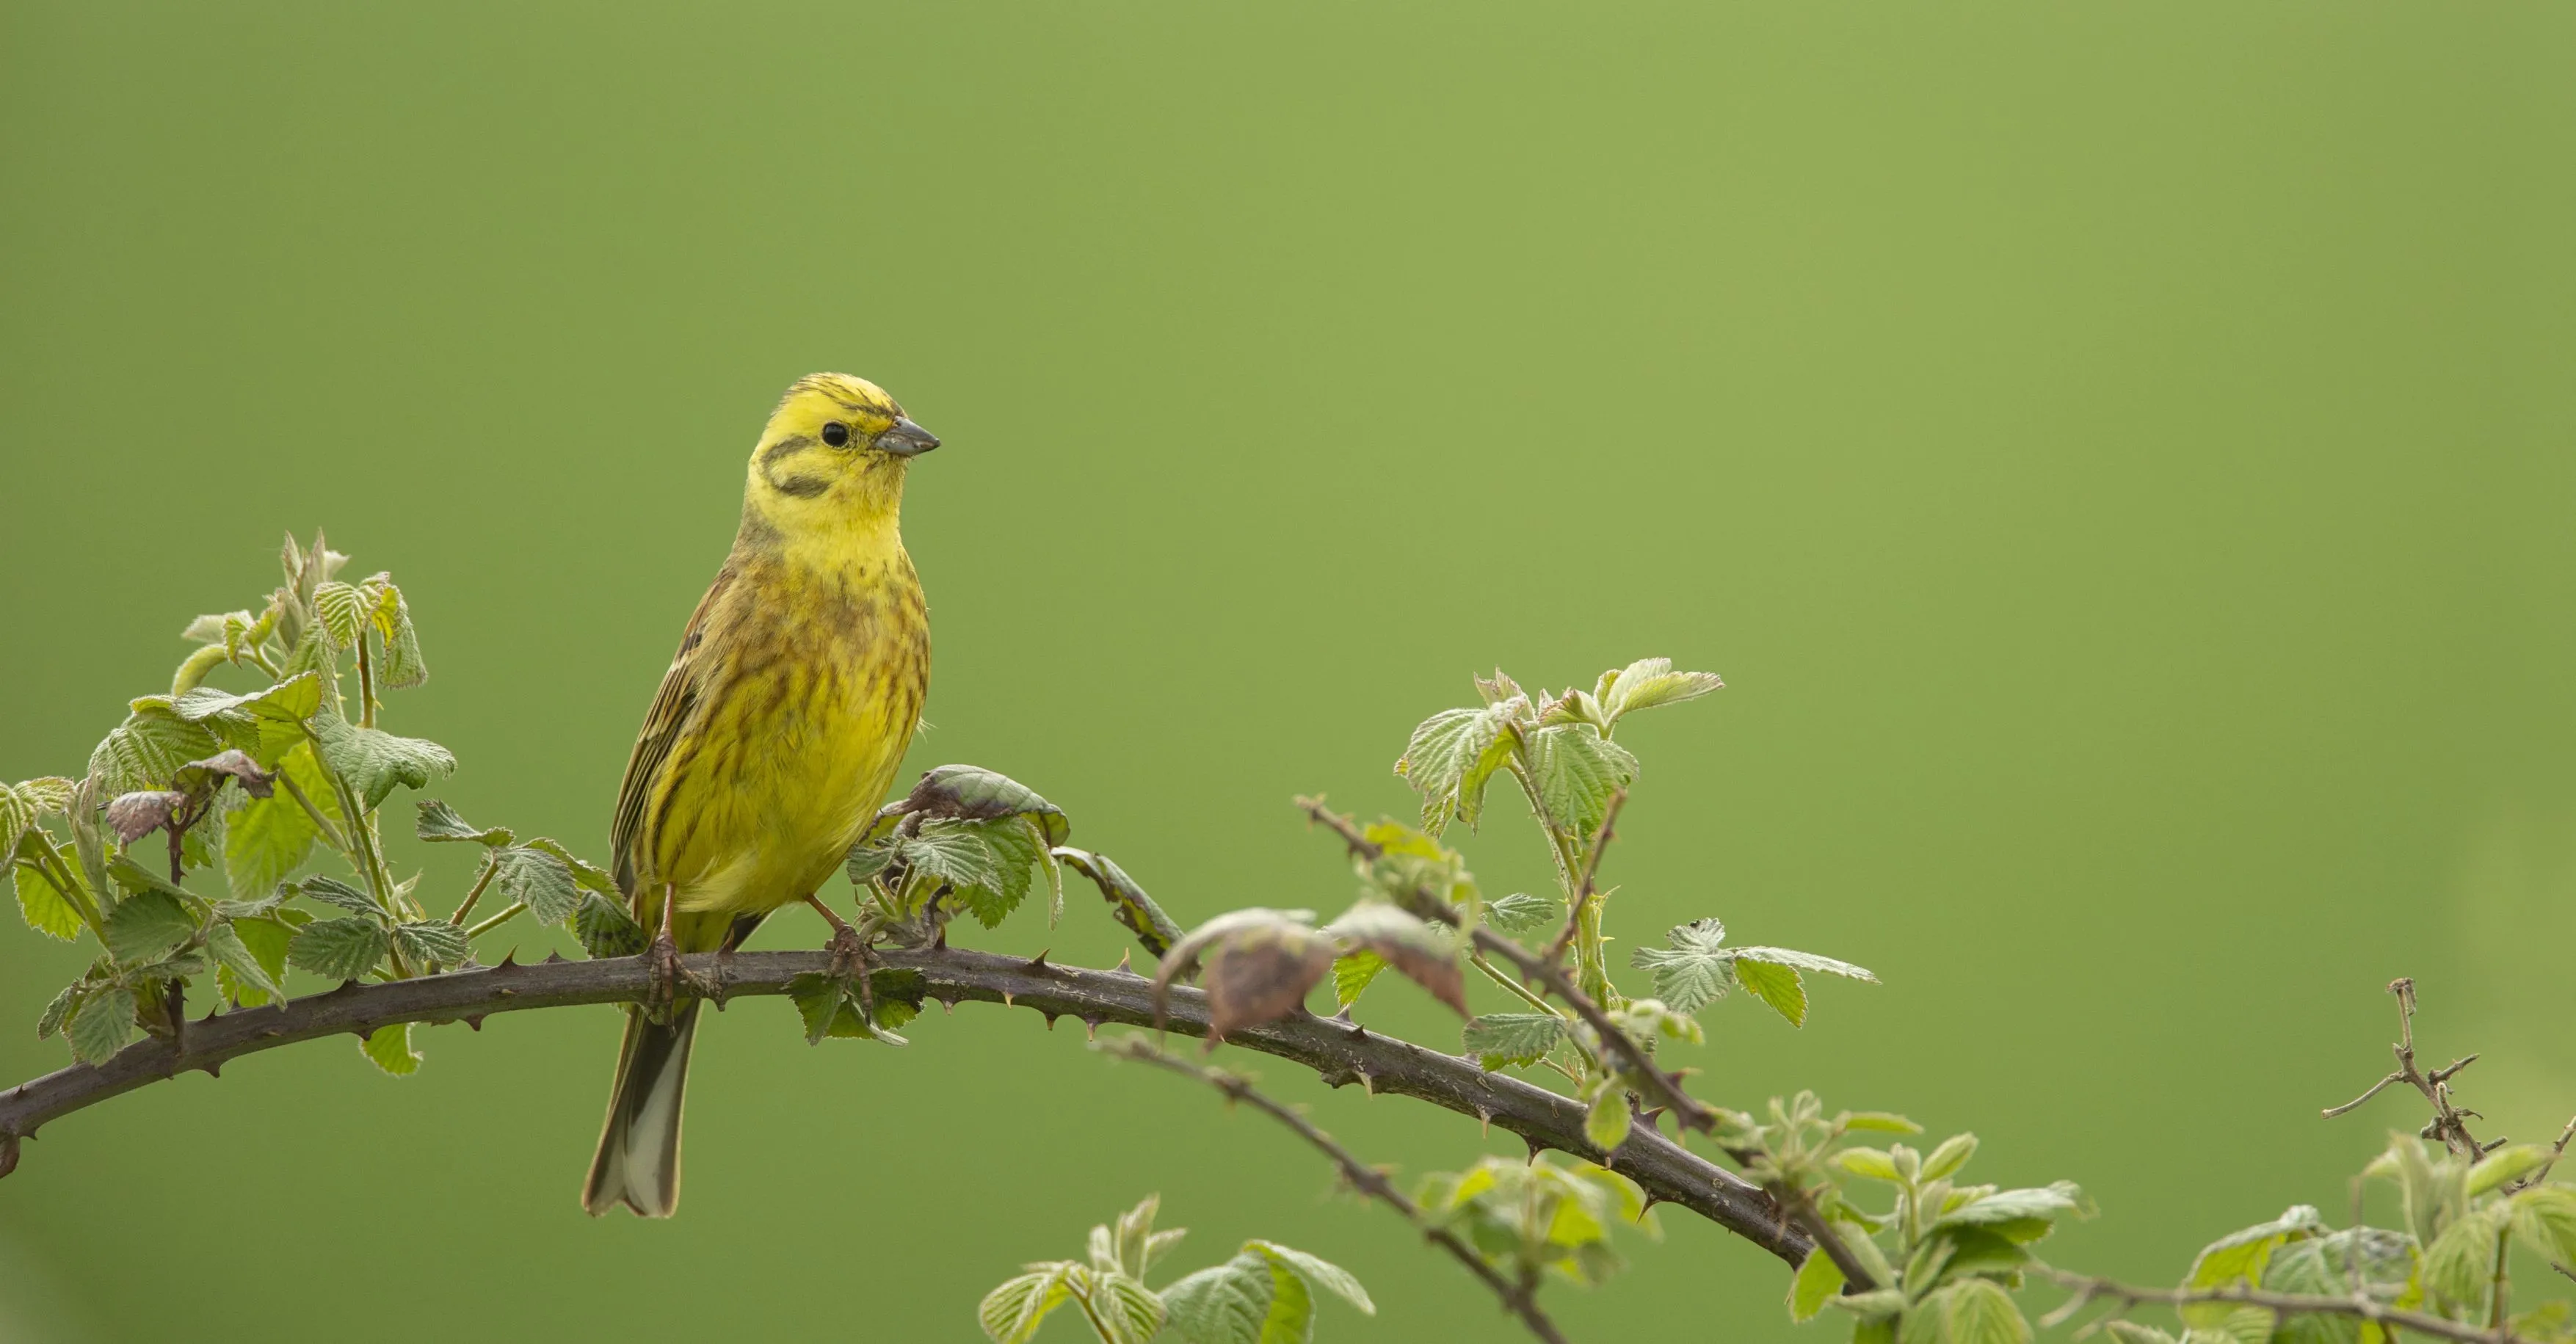 Yellowhammer perched on a bramble branch.